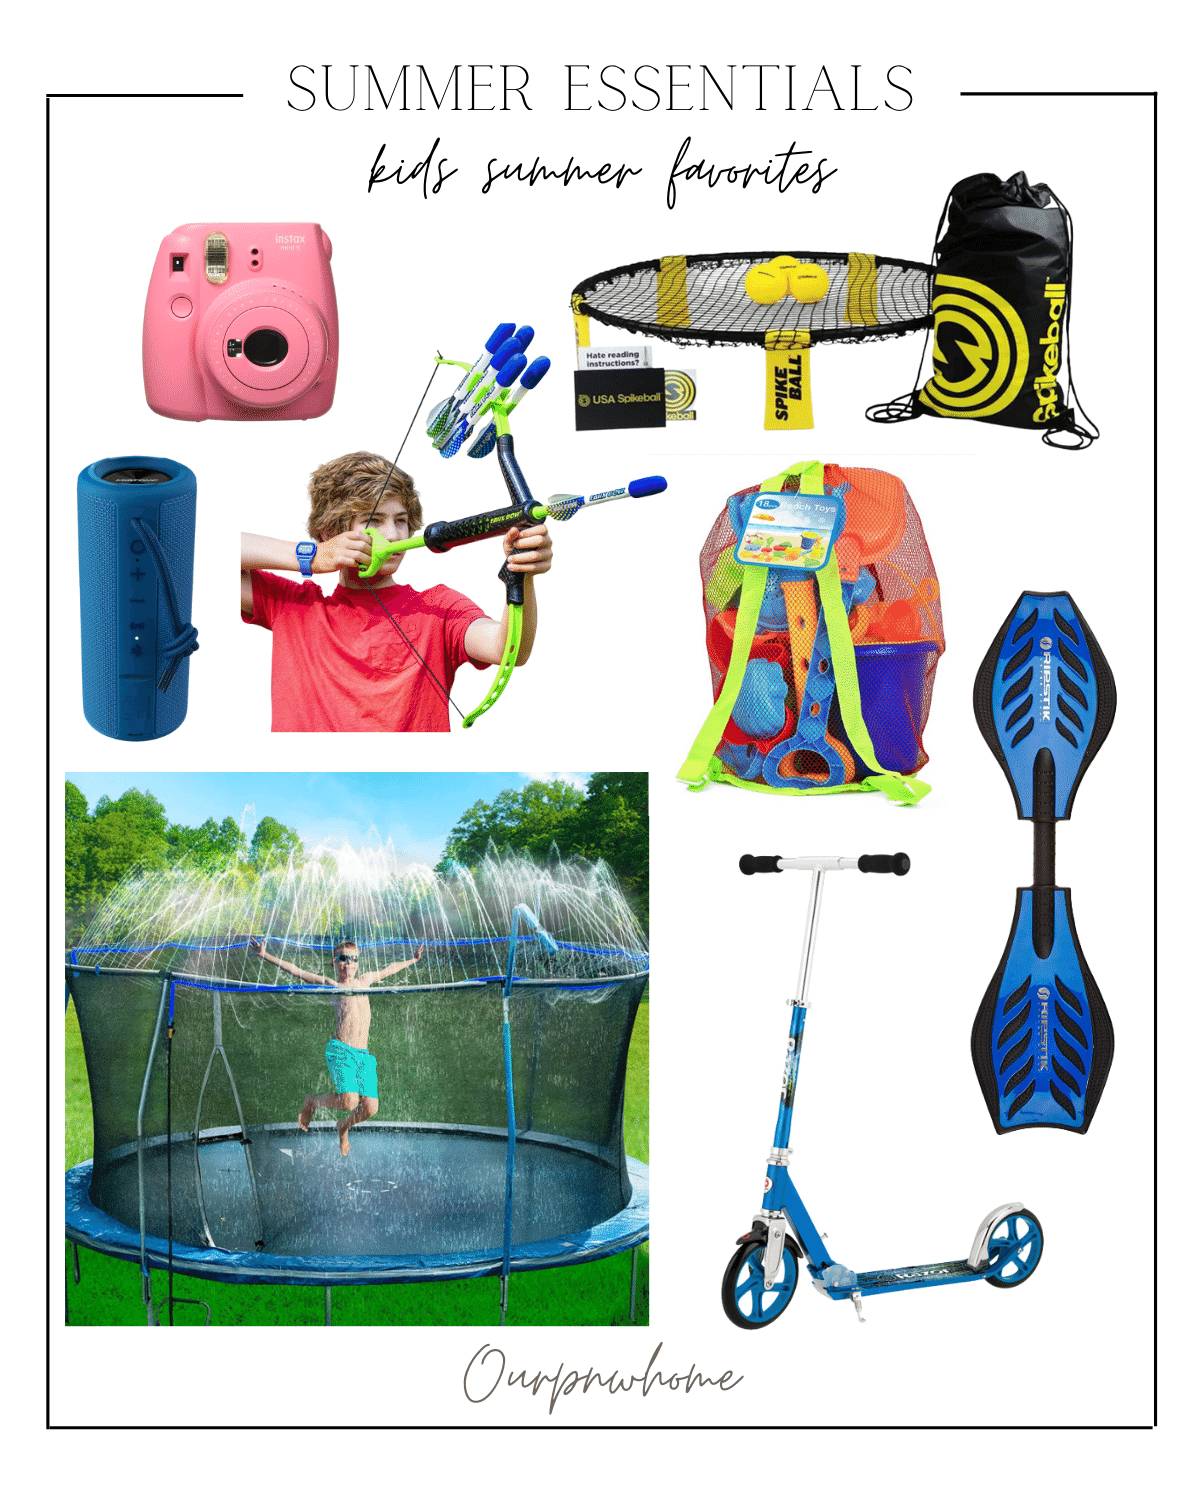 kids summer games, kids activities, disposable camera, spikeball, nerf bow and arrow, speaker, shovel kit, ripstick, scooter, water trampoline 